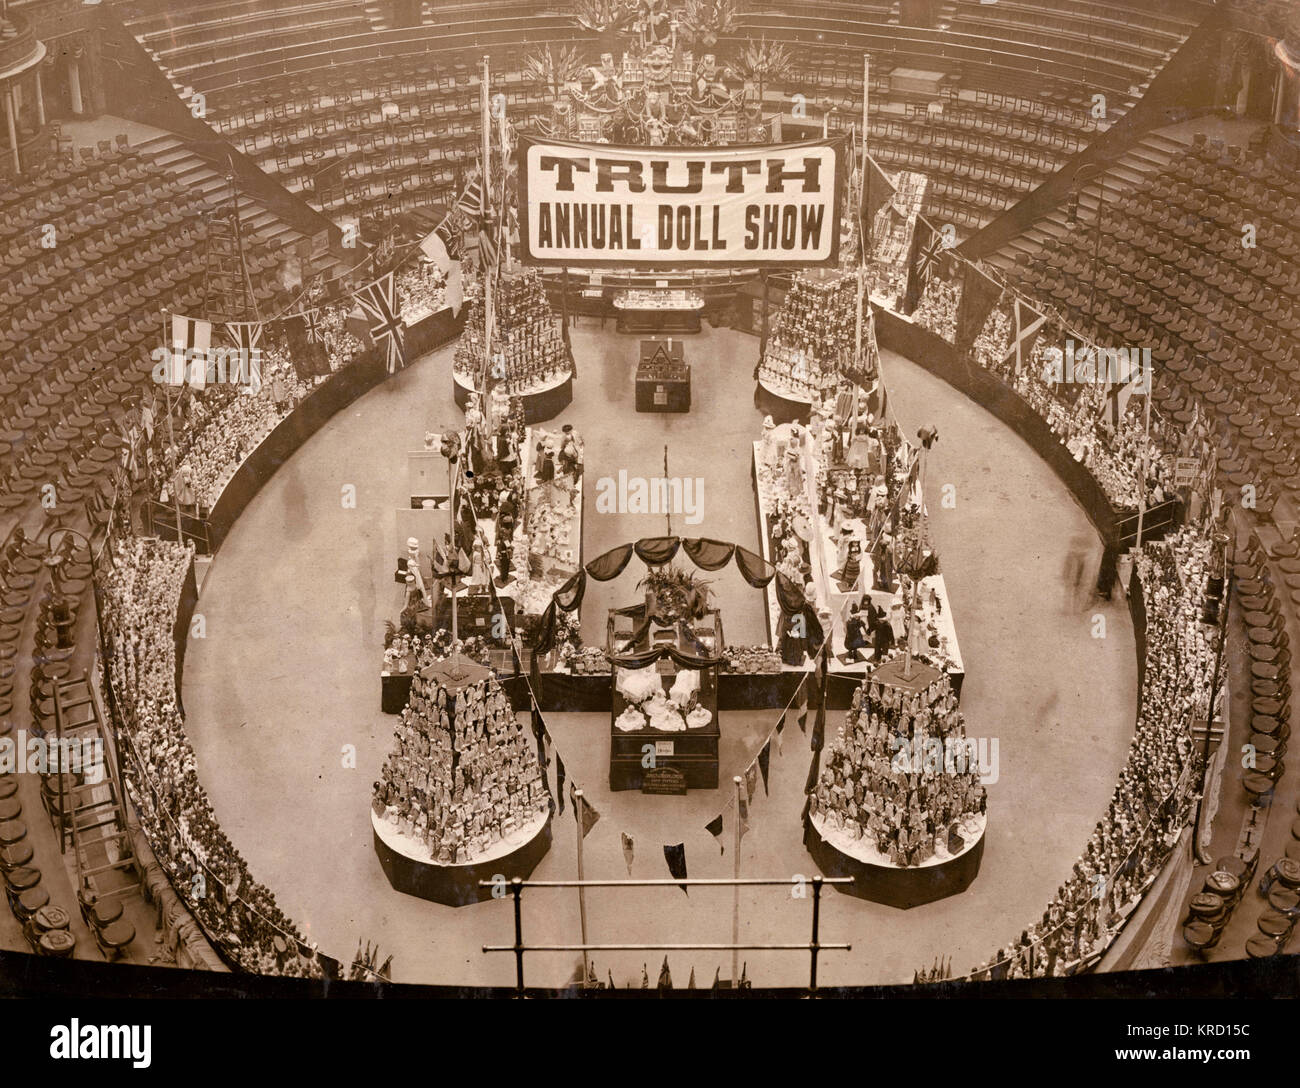 The arena of the Royal Albert Hall, London, set out with a large display of dolls, with empty seats all round.  Above the arena is a banner proclaiming TRUTH ANNUAL DOLL SHOW.      Date: circa 1909 Stock Photo